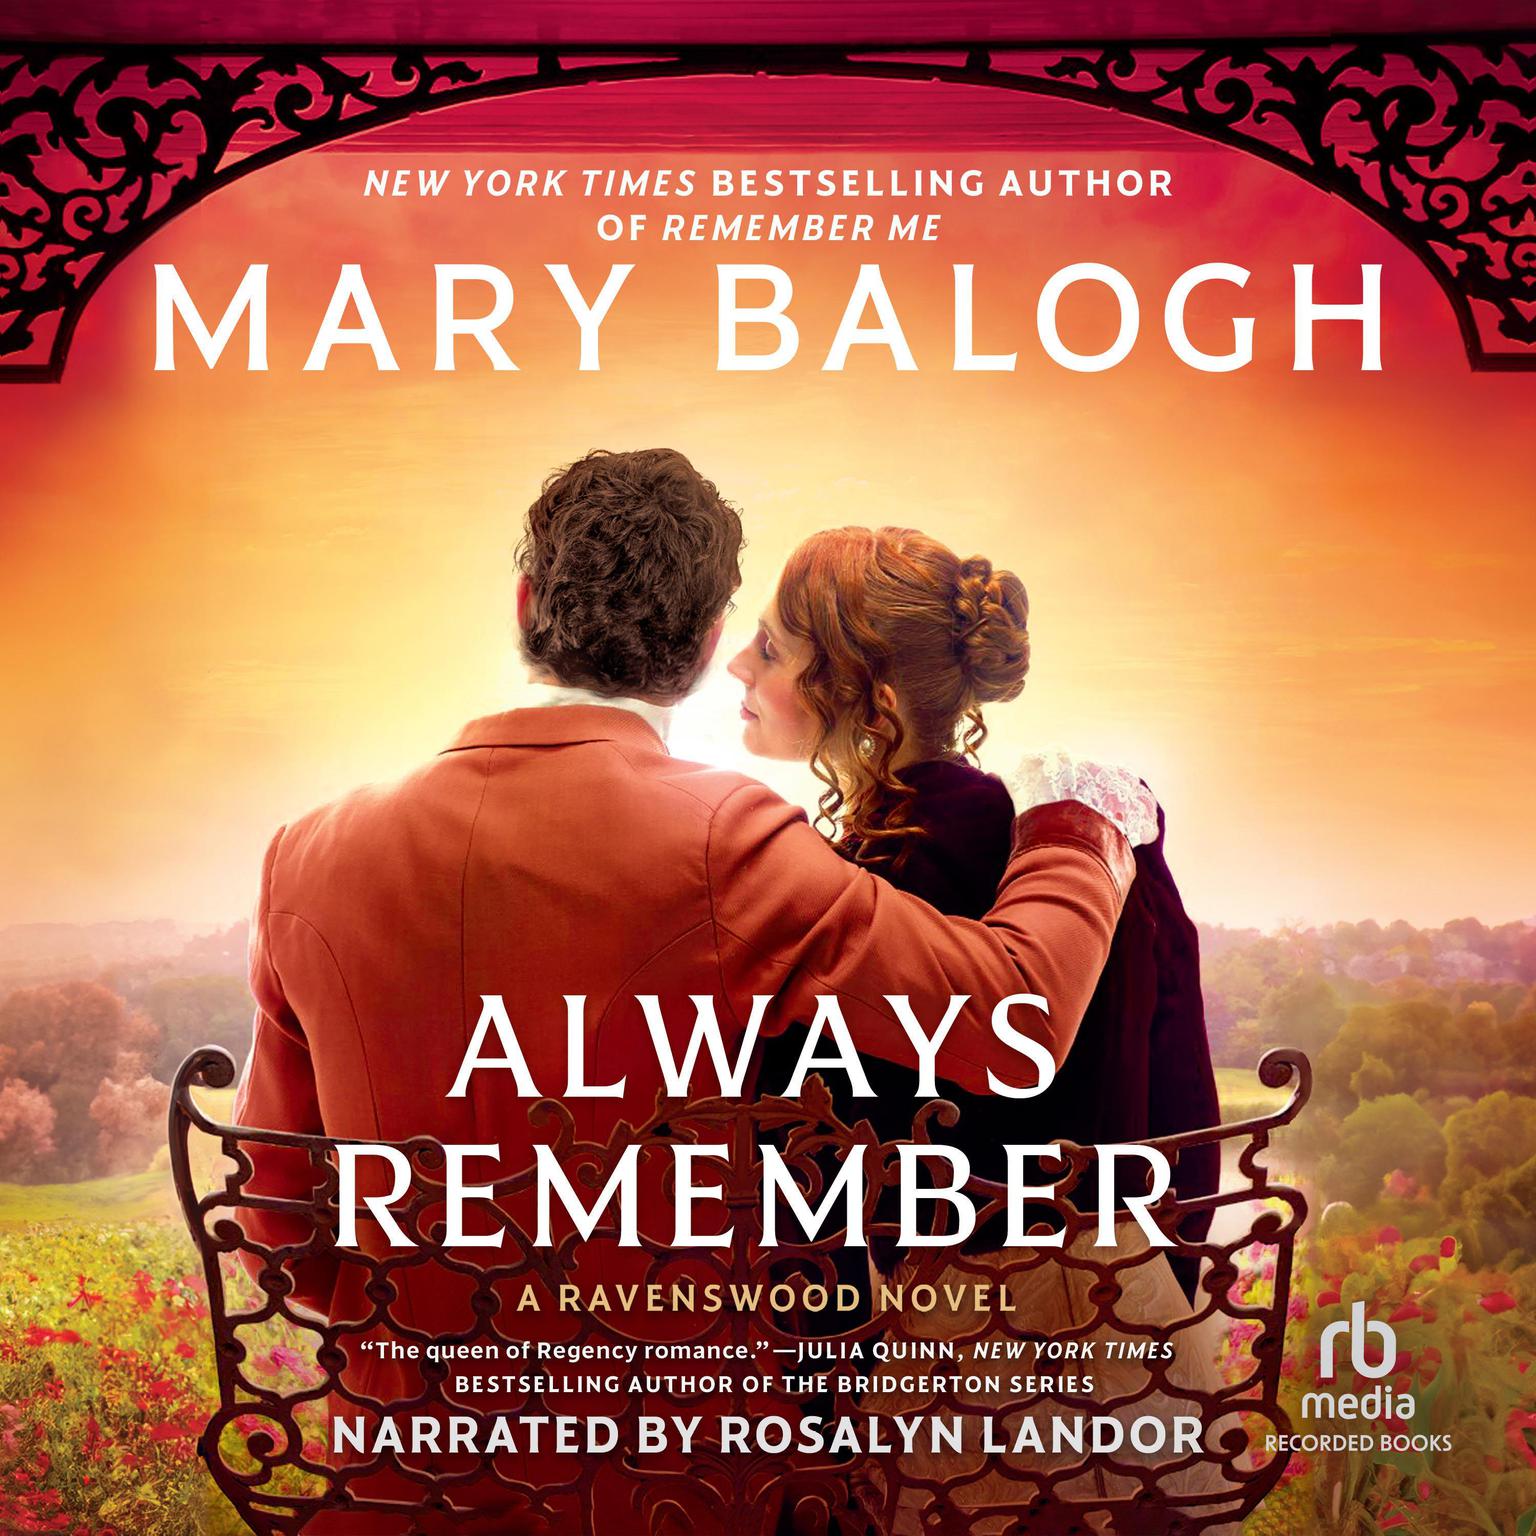 Always Remember Audiobook, by Mary Balogh